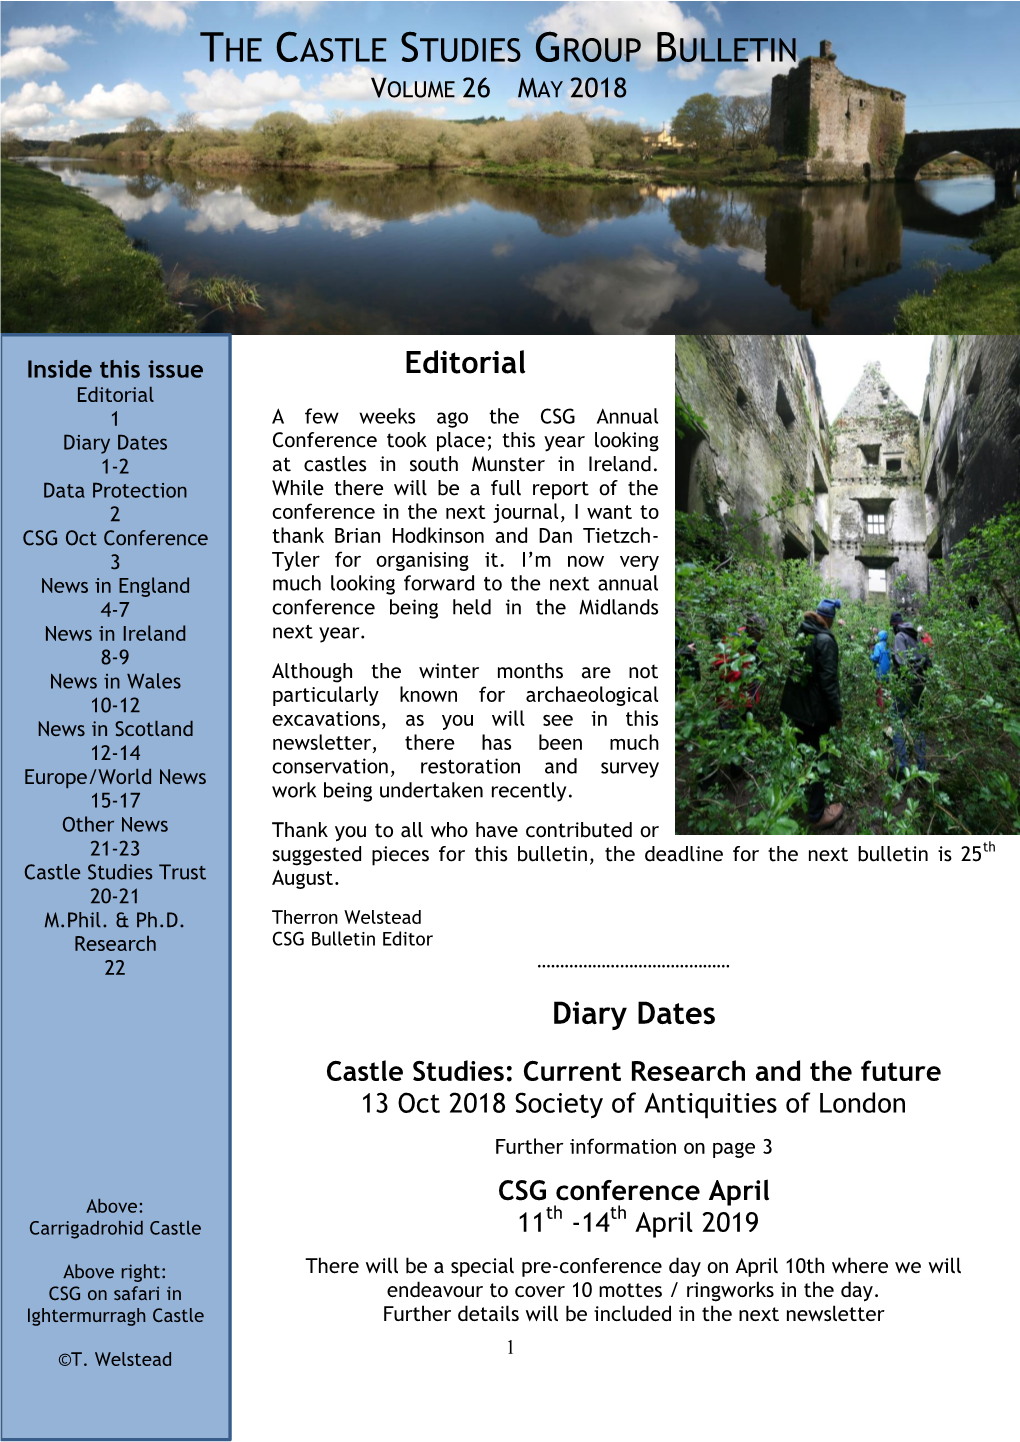 The Castle Studies Group Bulletin Volume 26 May 2018